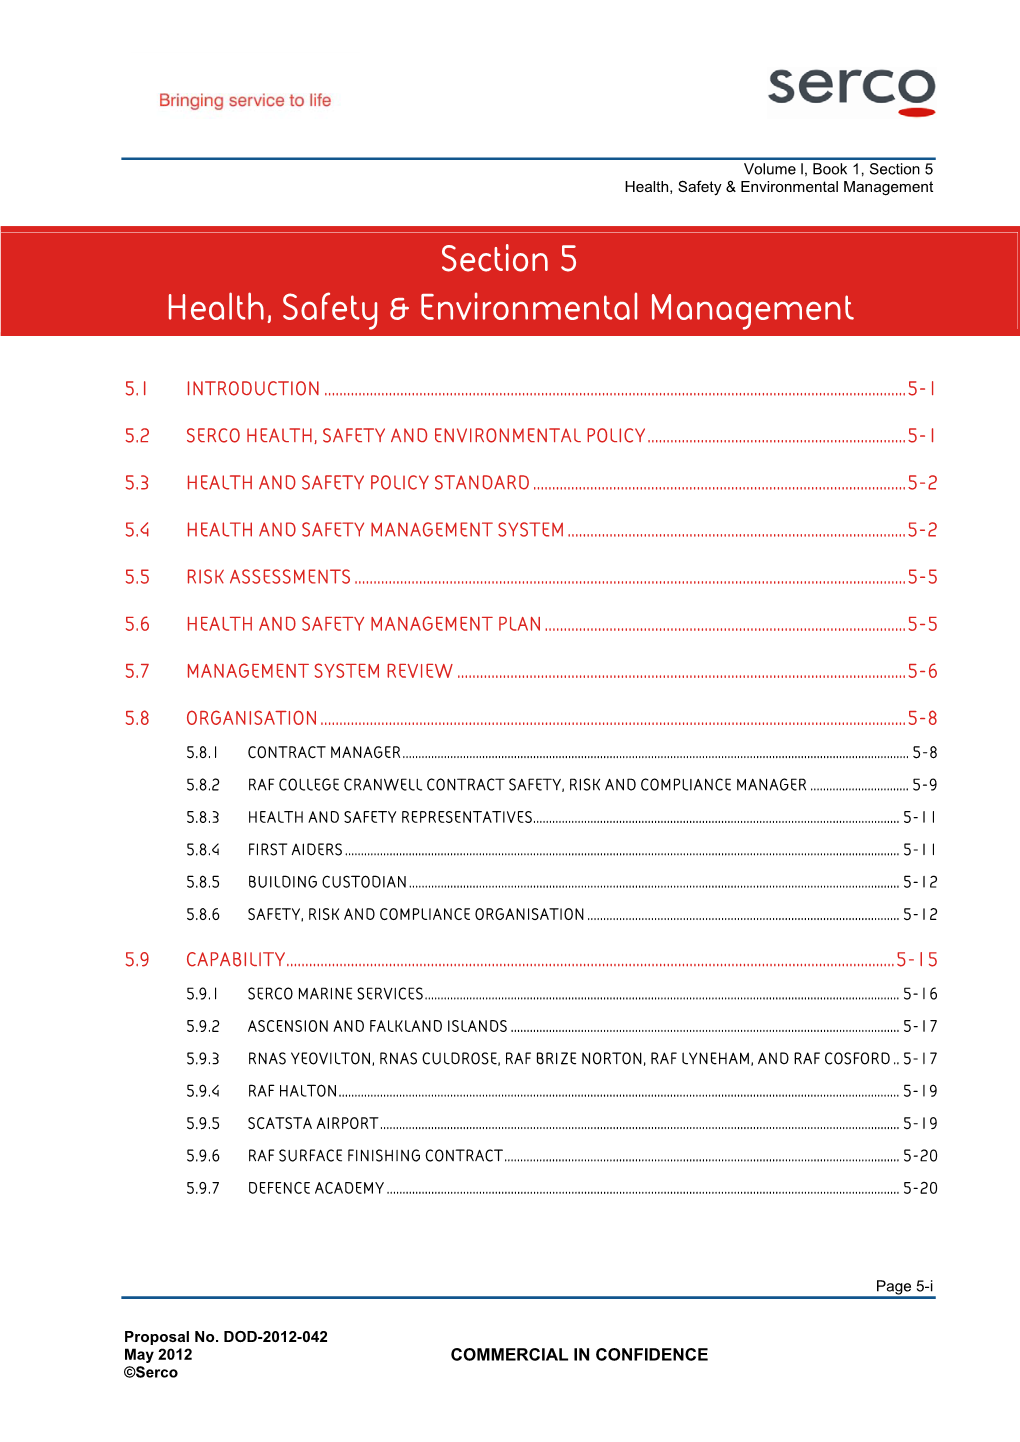 Section 5 Health, Safety & Environmental Management